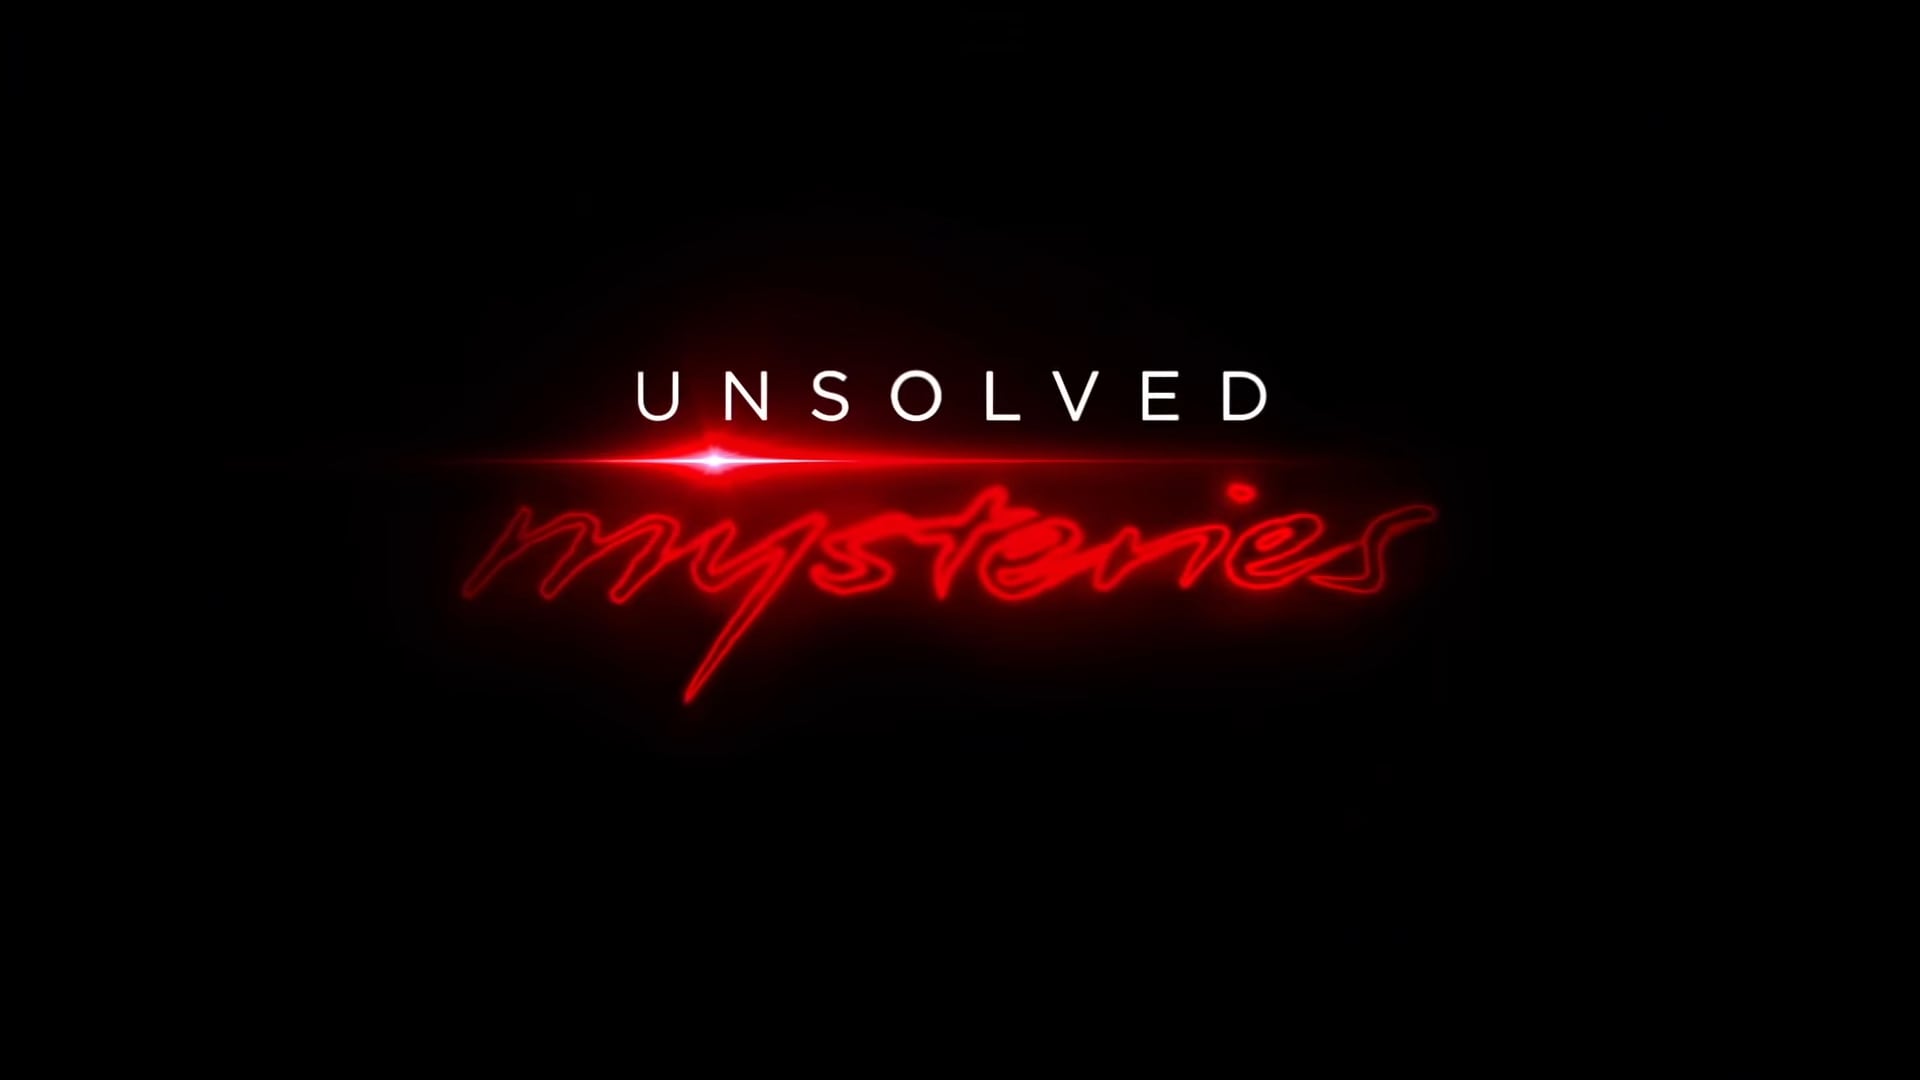 Netflix Unsolved Mysteries Trailer, Netflix Crime Series, Netflix Reality Shows, Coming to Netflix in July 2020